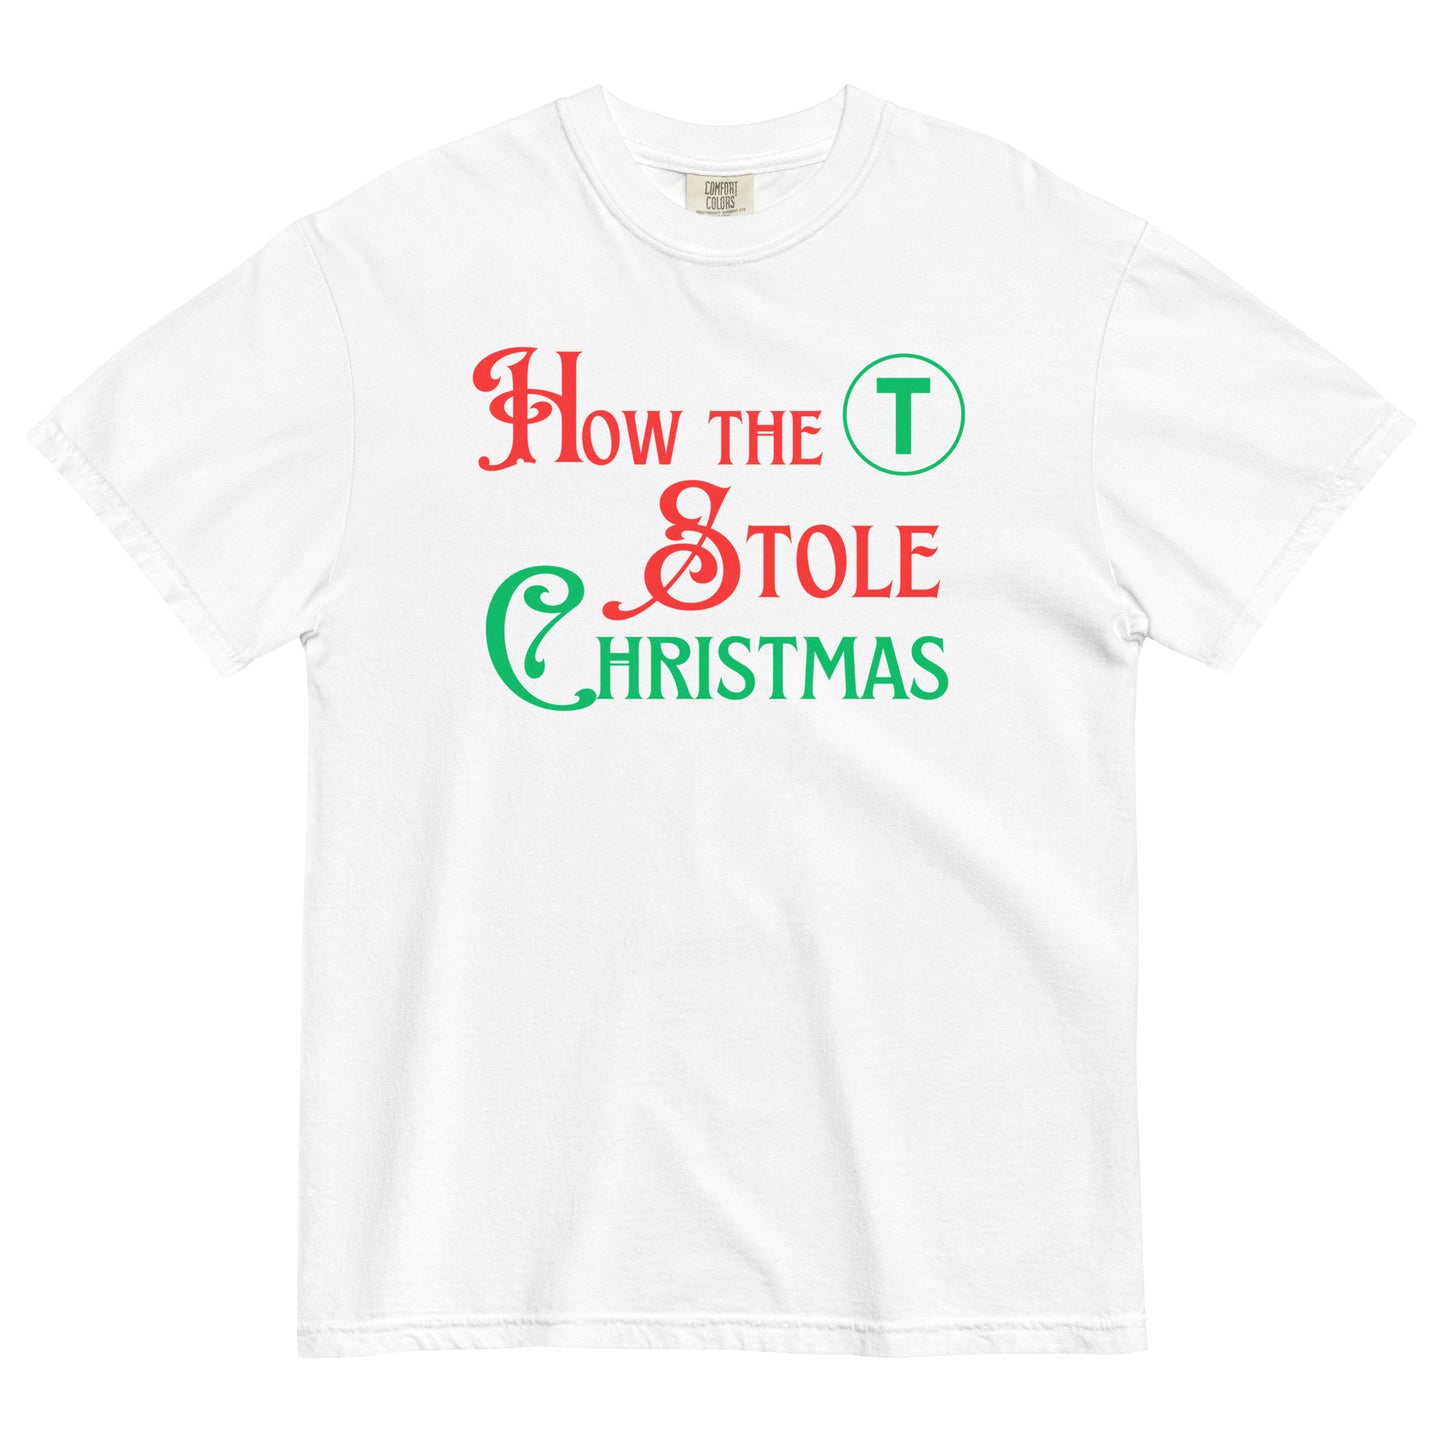 How the T Stole Christmas Storybook T-Shirt